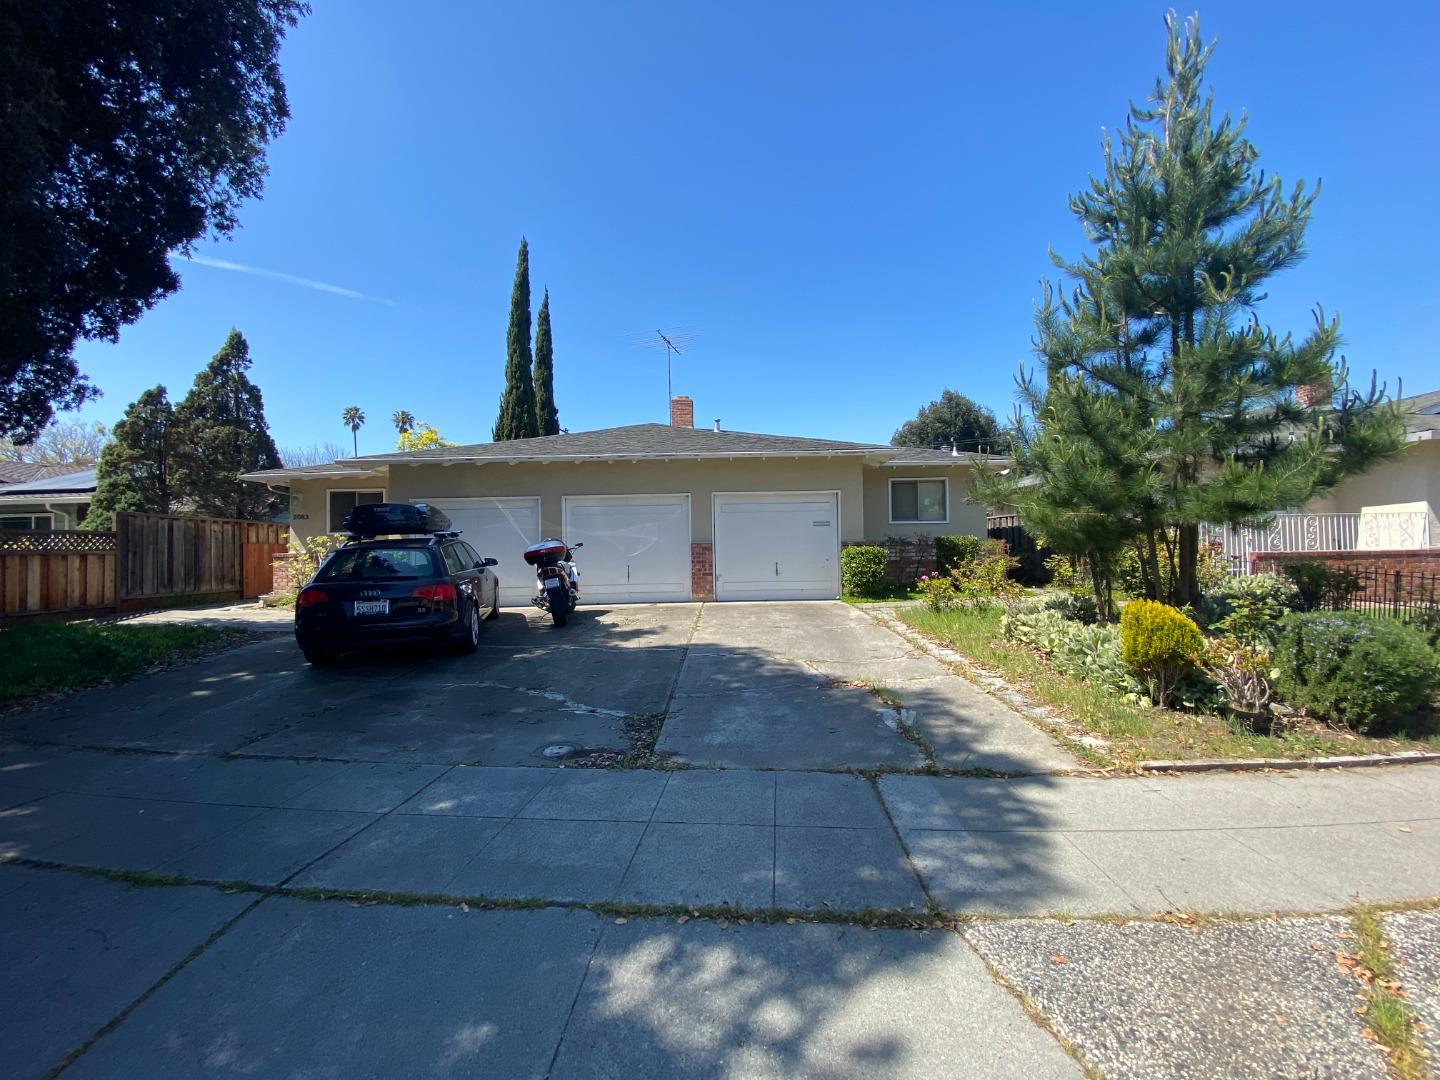 Photo of 2085 Kim Louise Dr in Campbell, CA